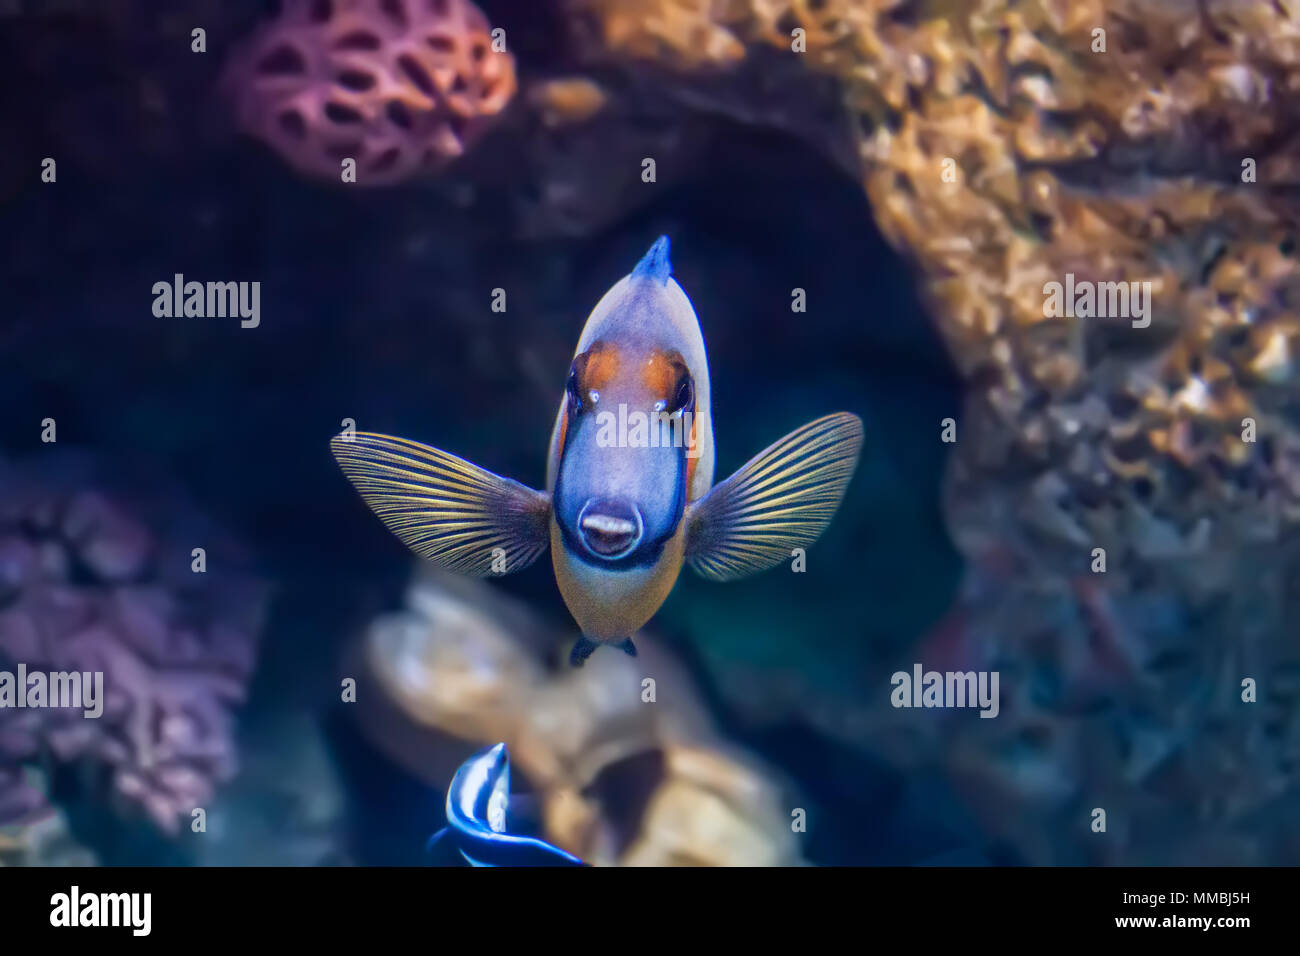 Mimic tang fish and a cleaner wrasse swimming to front of the aquarium with different coloured coral in view Stock Photo